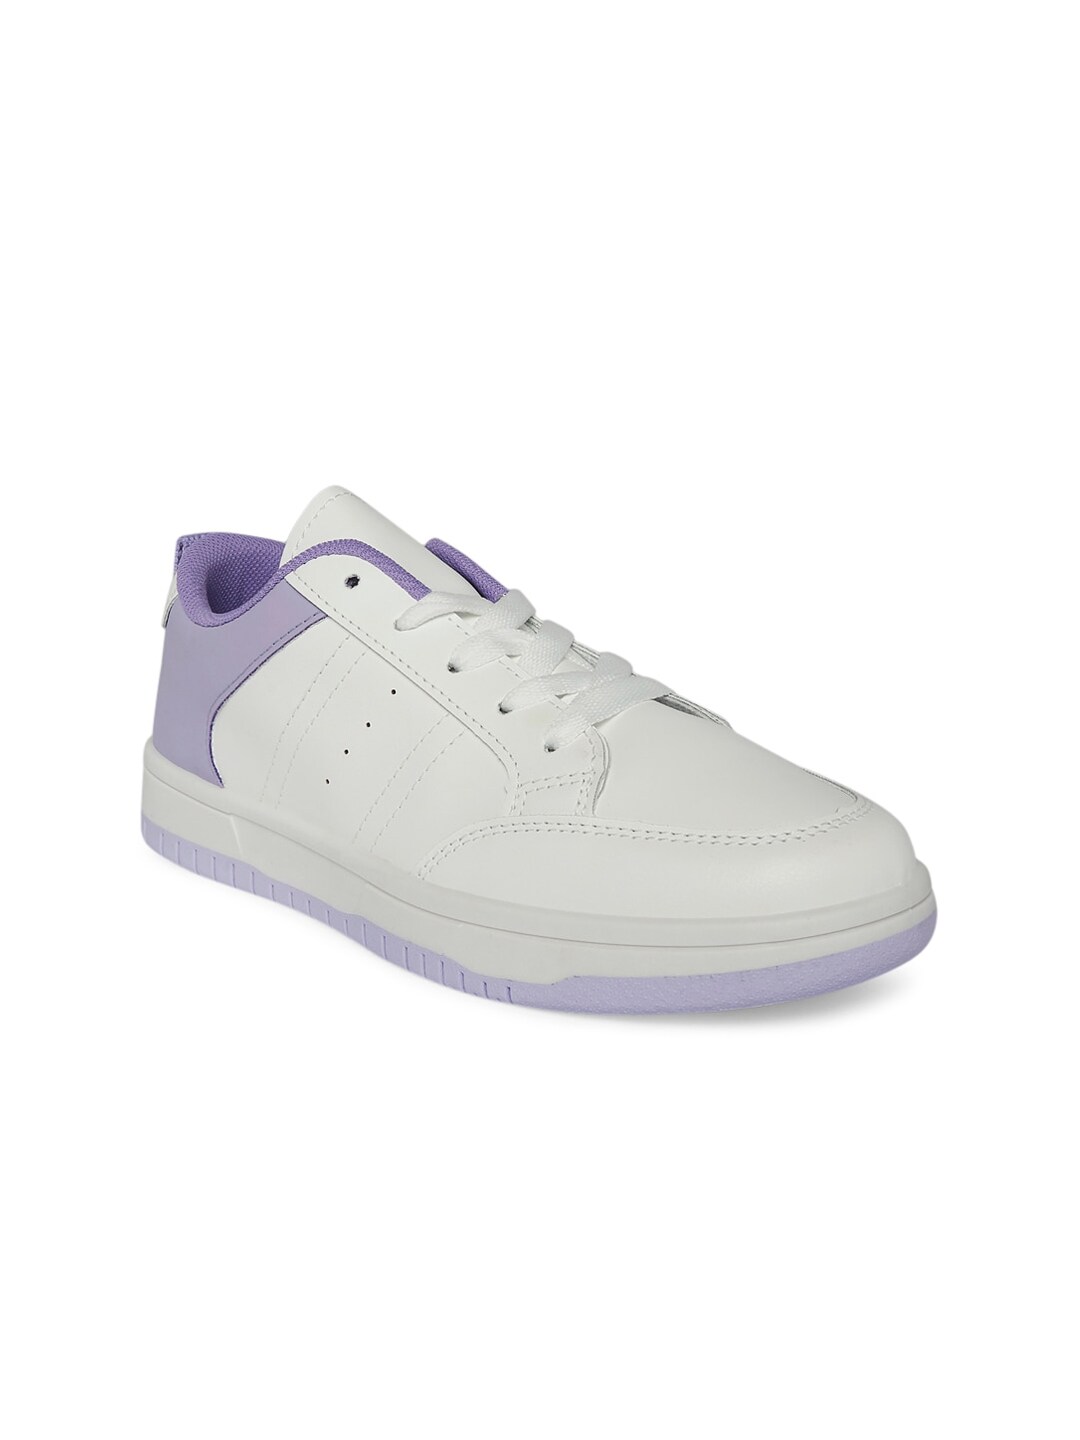 Forever Glam by Pantaloons Women White Perforations PU Sneakers Price in India